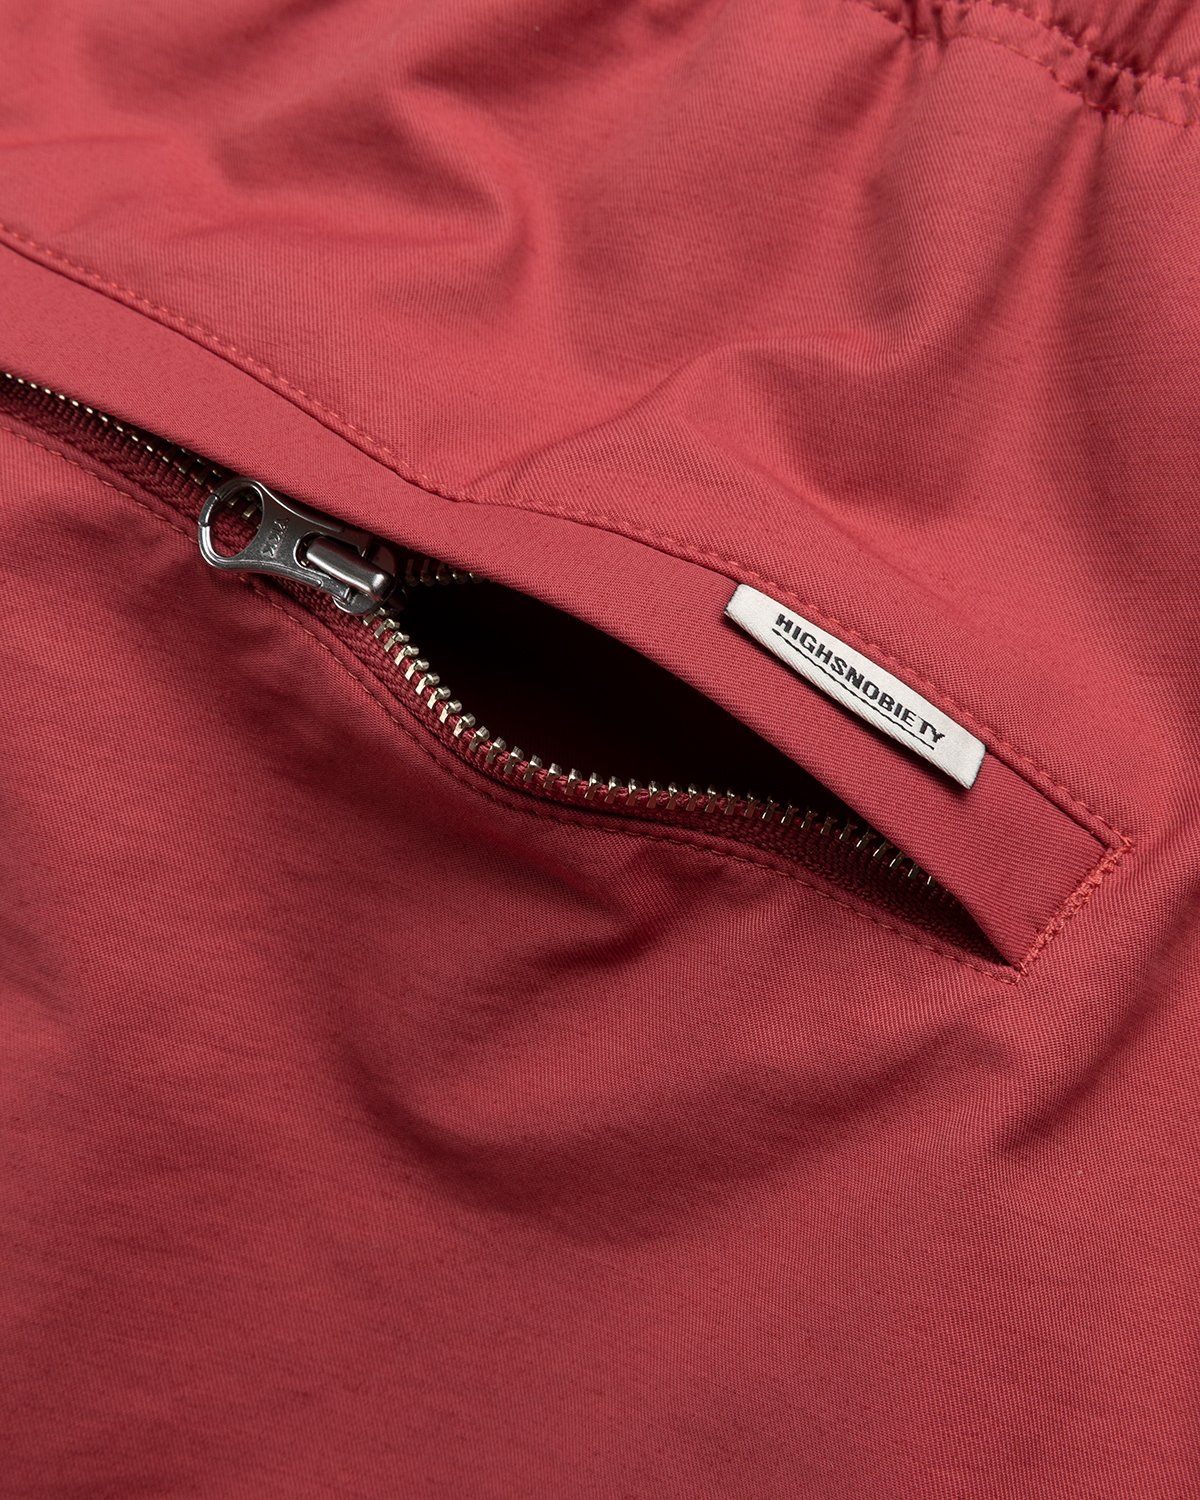 Highsnobiety - Cotton Nylon Water Short Red - Clothing - Pink - Image 5